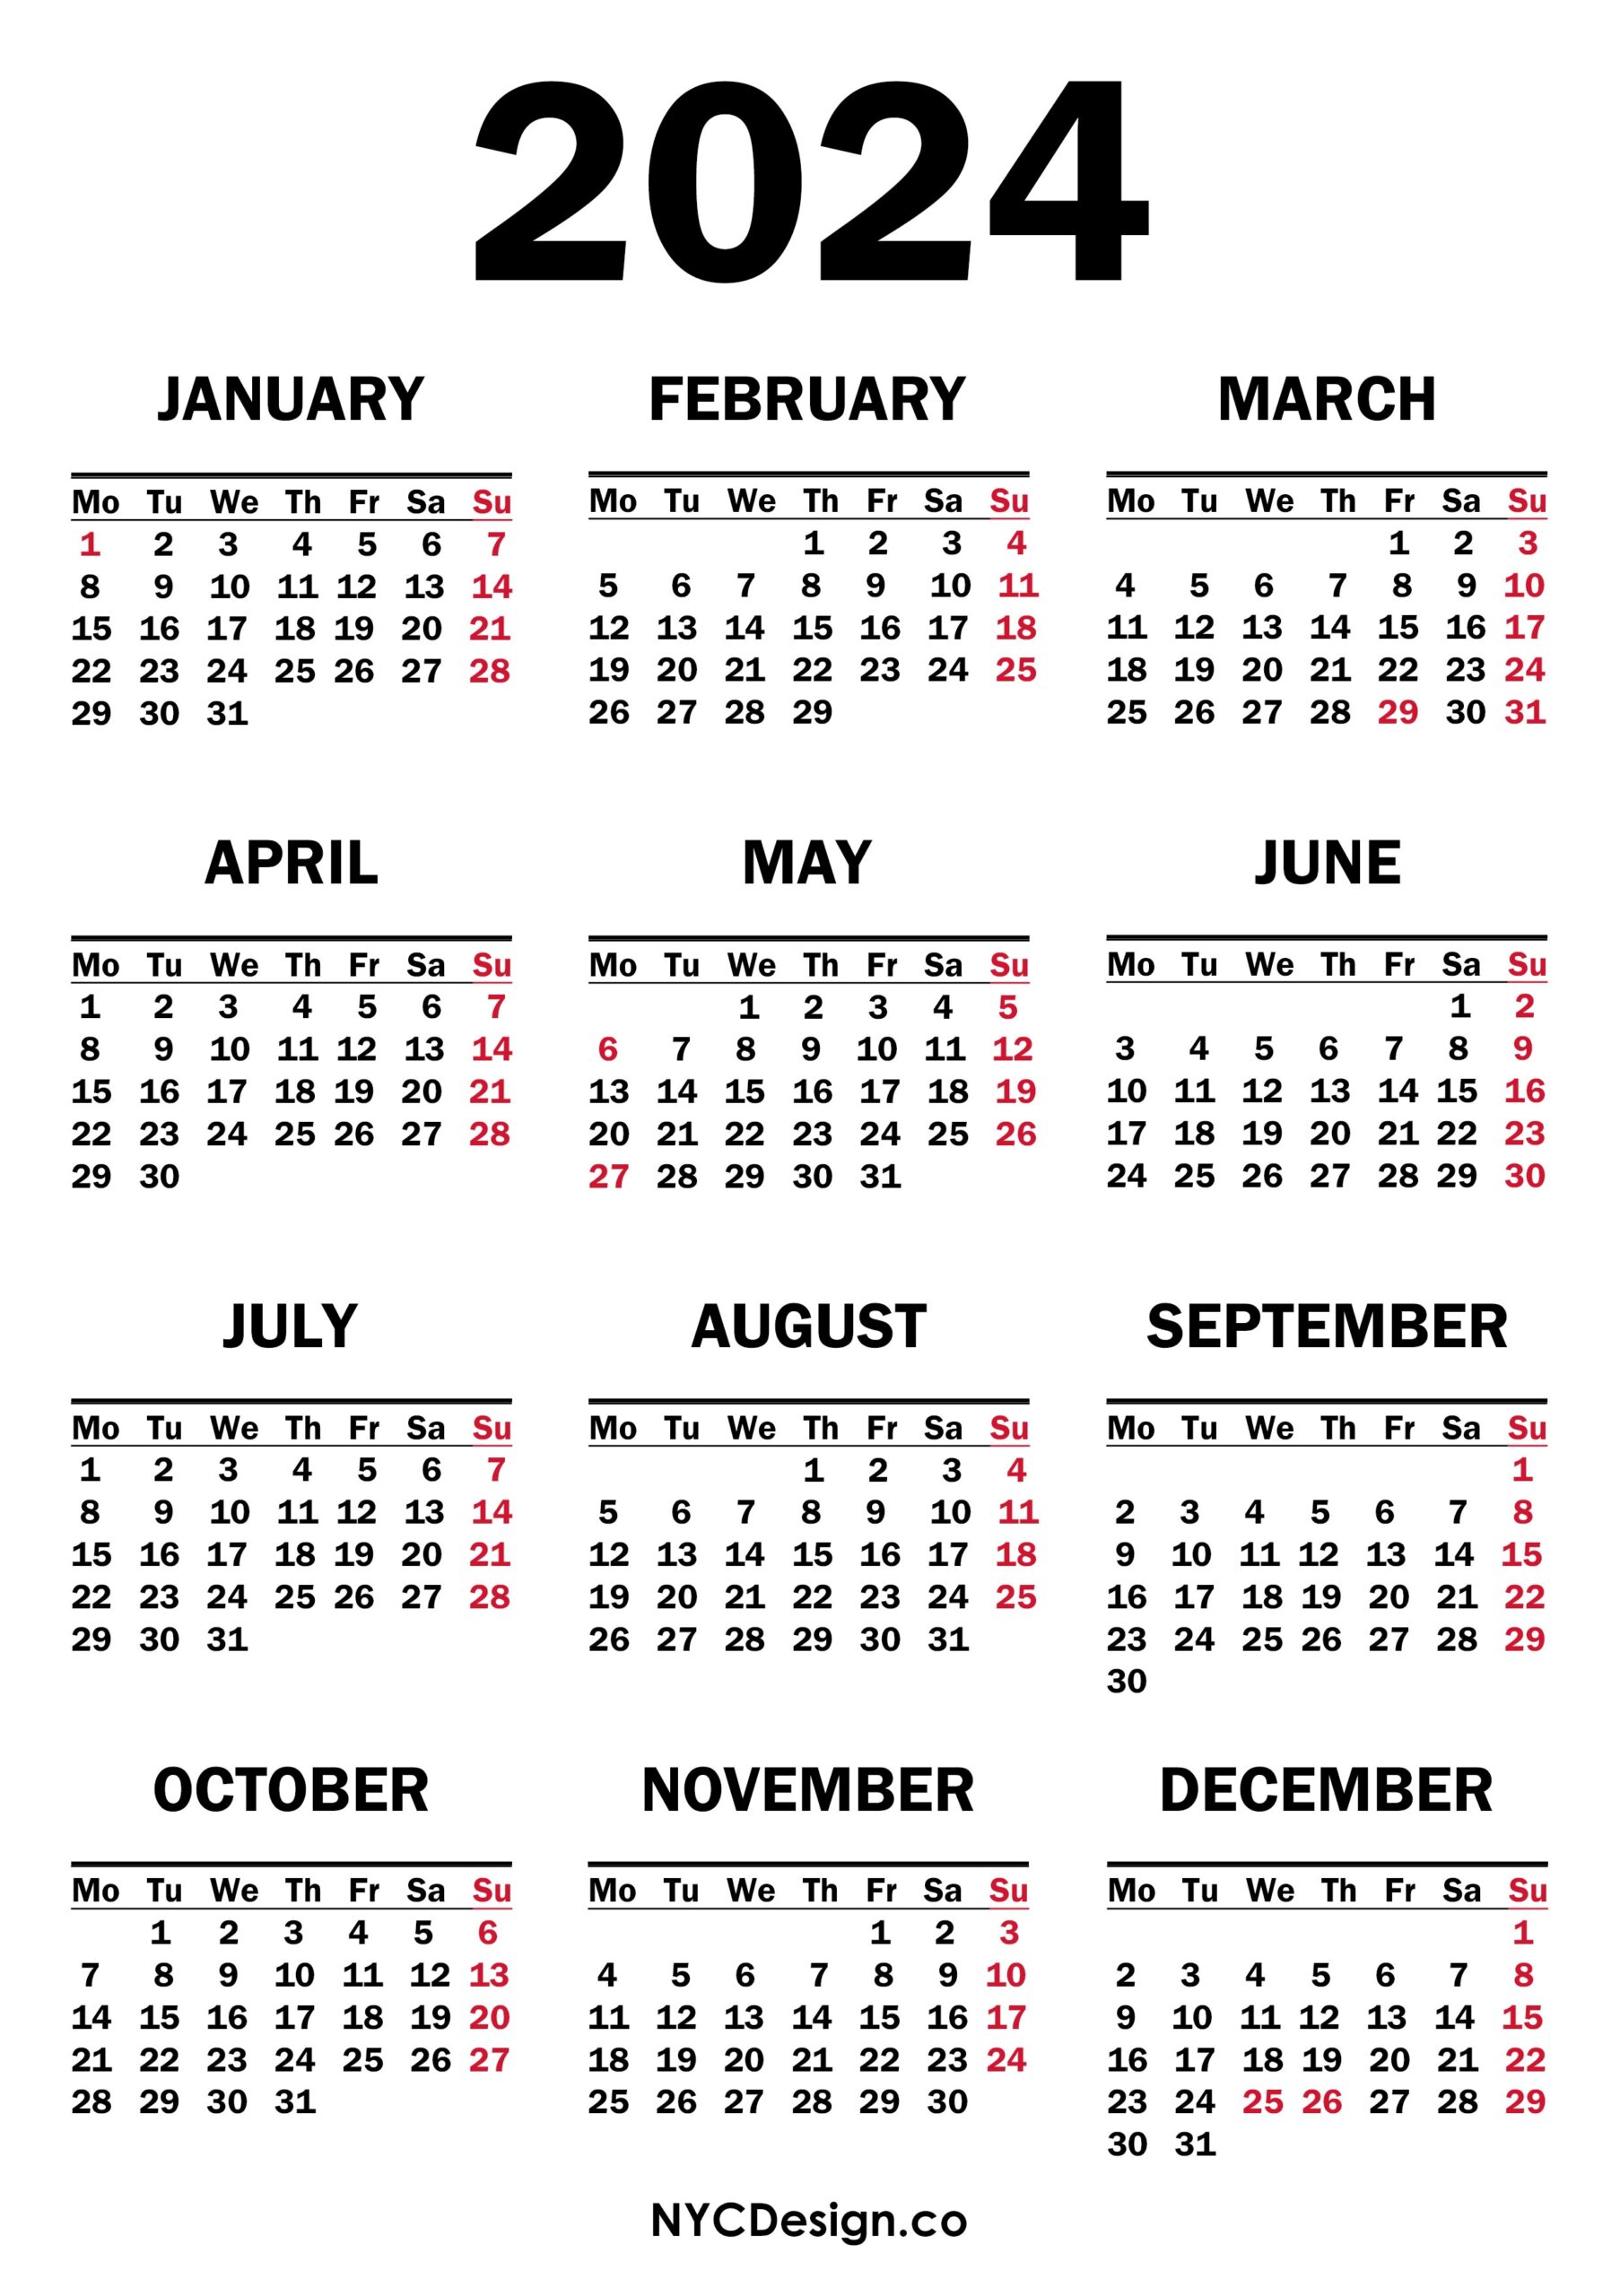 2024 Calendar With Holidays Printable Customize And Print - Free Printable 2024 Calendar With Holidays Without Downloading